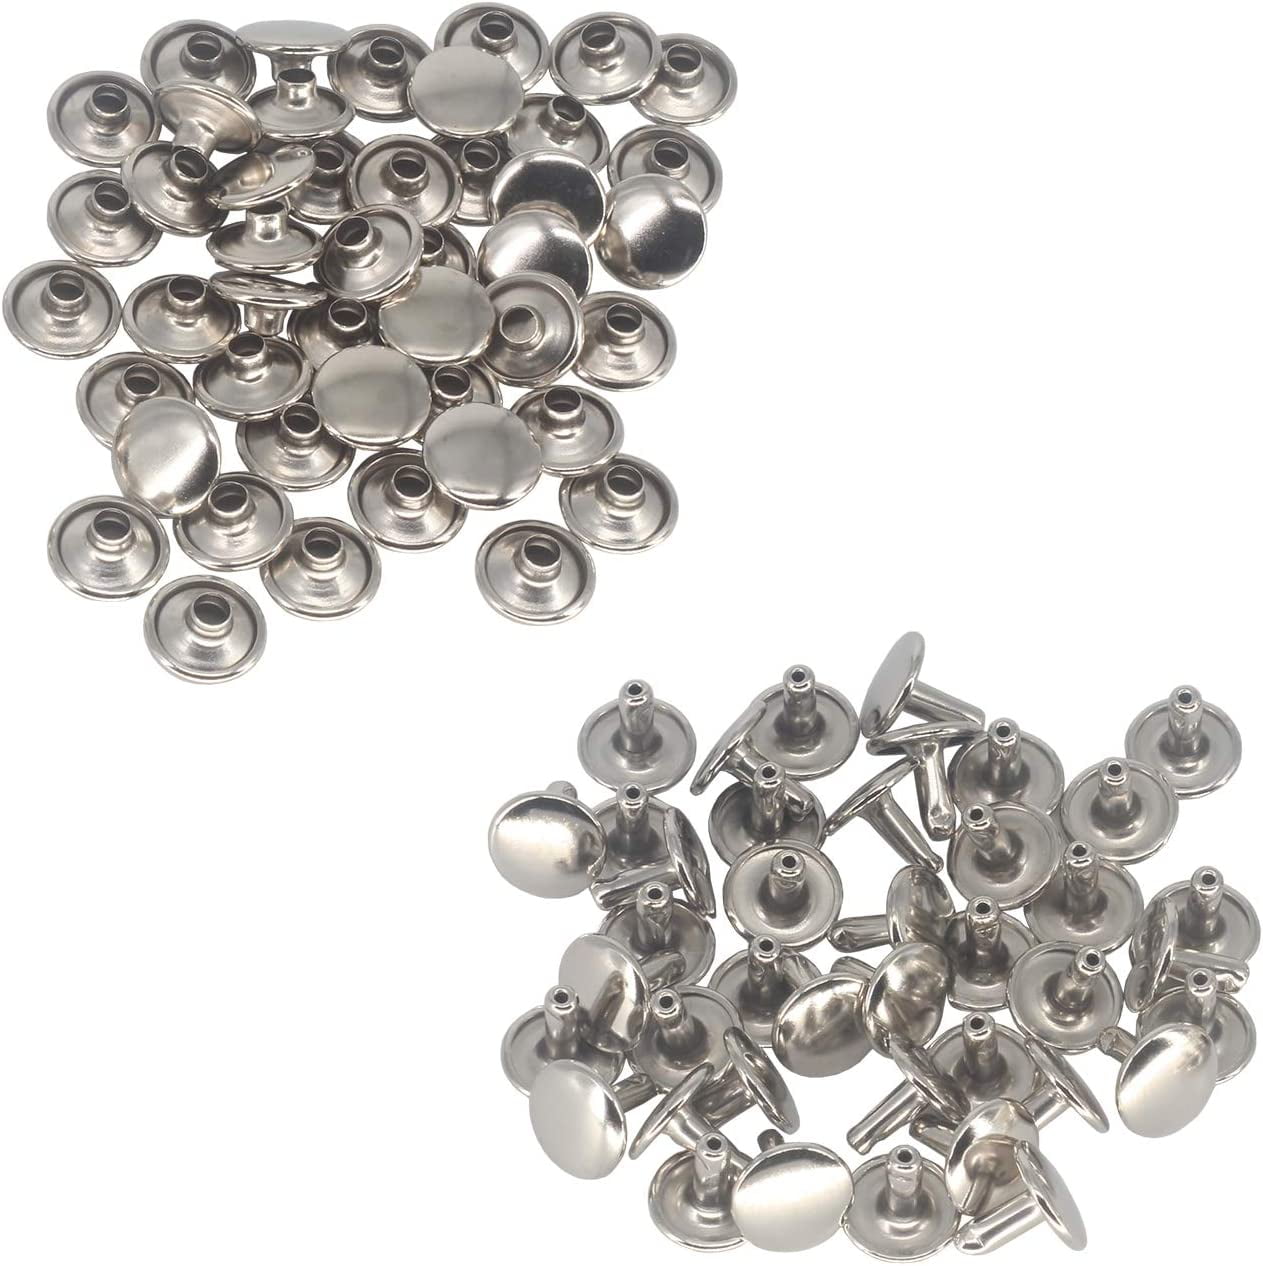 Stainless Steel 6x6mm Silver Rivets for Leather 50ct Hypoallergenic  Nickel-free Double Cap Rivet Studs Fast Shipping From USA 9 